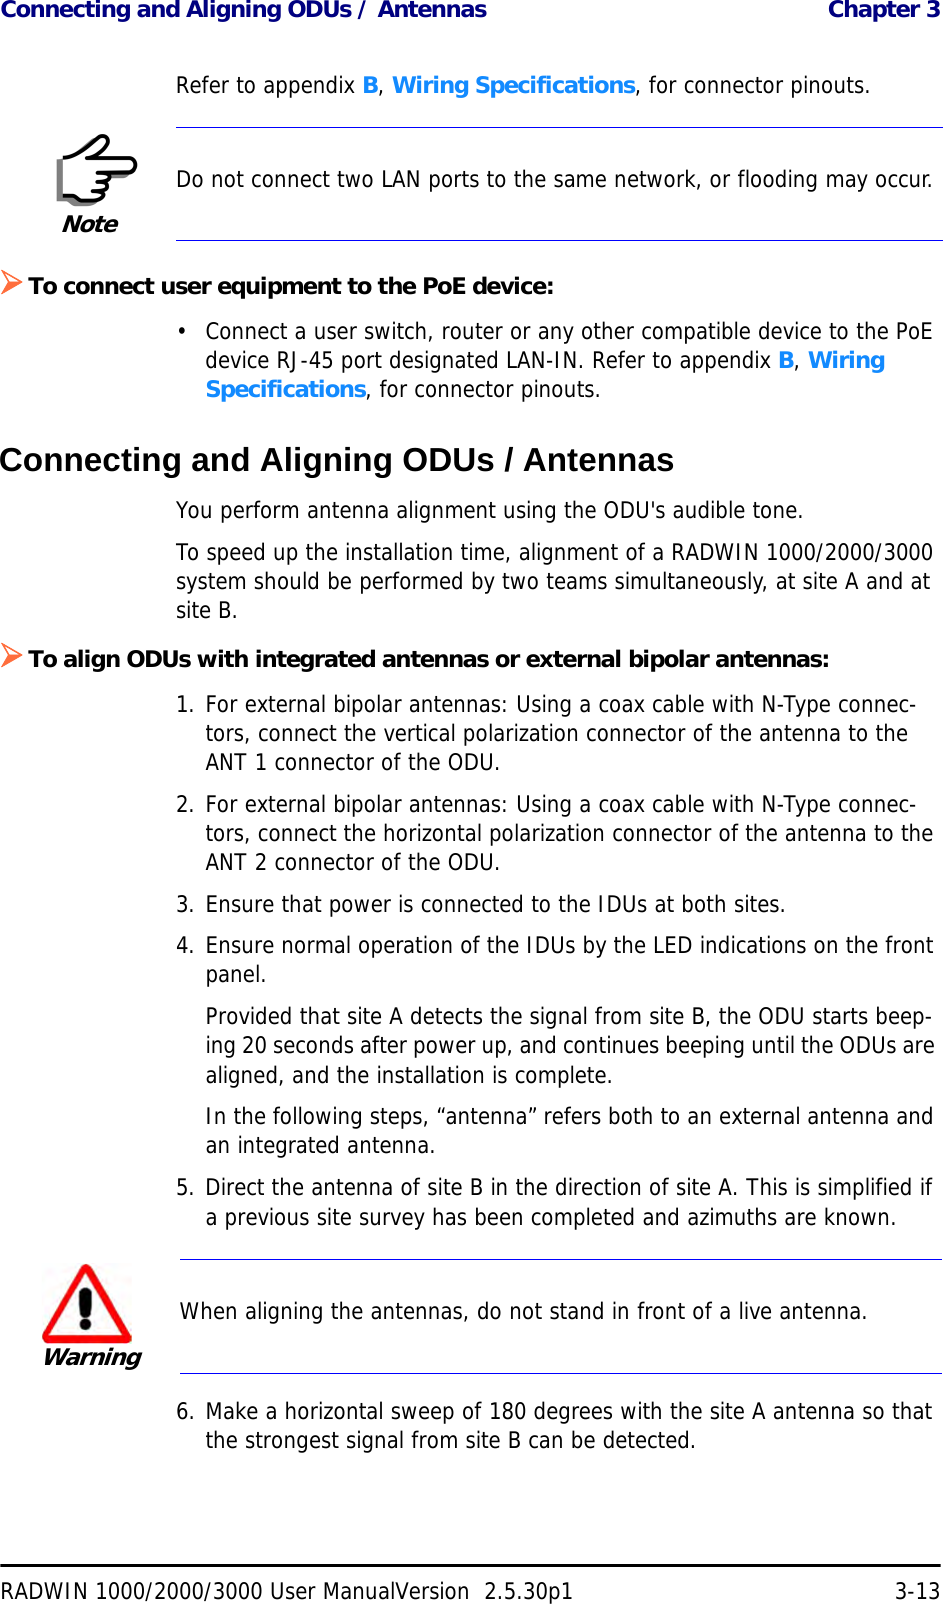 Connecting and Aligning ODUs / Antennas  Chapter 3RADWIN 1000/2000/3000 User ManualVersion  2.5.30p1 3-13Refer to appendix B, Wiring Specifications, for connector pinouts.¾To connect user equipment to the PoE device:• Connect a user switch, router or any other compatible device to the PoE device RJ-45 port designated LAN-IN. Refer to appendix B, Wiring Specifications, for connector pinouts.Connecting and Aligning ODUs / AntennasYou perform antenna alignment using the ODU&apos;s audible tone.To speed up the installation time, alignment of a RADWIN 1000/2000/3000 system should be performed by two teams simultaneously, at site A and at site B.¾To align ODUs with integrated antennas or external bipolar antennas:1. For external bipolar antennas: Using a coax cable with N-Type connec-tors, connect the vertical polarization connector of the antenna to the ANT 1 connector of the ODU.2. For external bipolar antennas: Using a coax cable with N-Type connec-tors, connect the horizontal polarization connector of the antenna to the ANT 2 connector of the ODU.3. Ensure that power is connected to the IDUs at both sites.4. Ensure normal operation of the IDUs by the LED indications on the front panel.Provided that site A detects the signal from site B, the ODU starts beep-ing 20 seconds after power up, and continues beeping until the ODUs are aligned, and the installation is complete.In the following steps, “antenna” refers both to an external antenna and an integrated antenna.5. Direct the antenna of site B in the direction of site A. This is simplified if a previous site survey has been completed and azimuths are known.6. Make a horizontal sweep of 180 degrees with the site A antenna so that the strongest signal from site B can be detected.NoteDo not connect two LAN ports to the same network, or flooding may occur.WarningWhen aligning the antennas, do not stand in front of a live antenna.